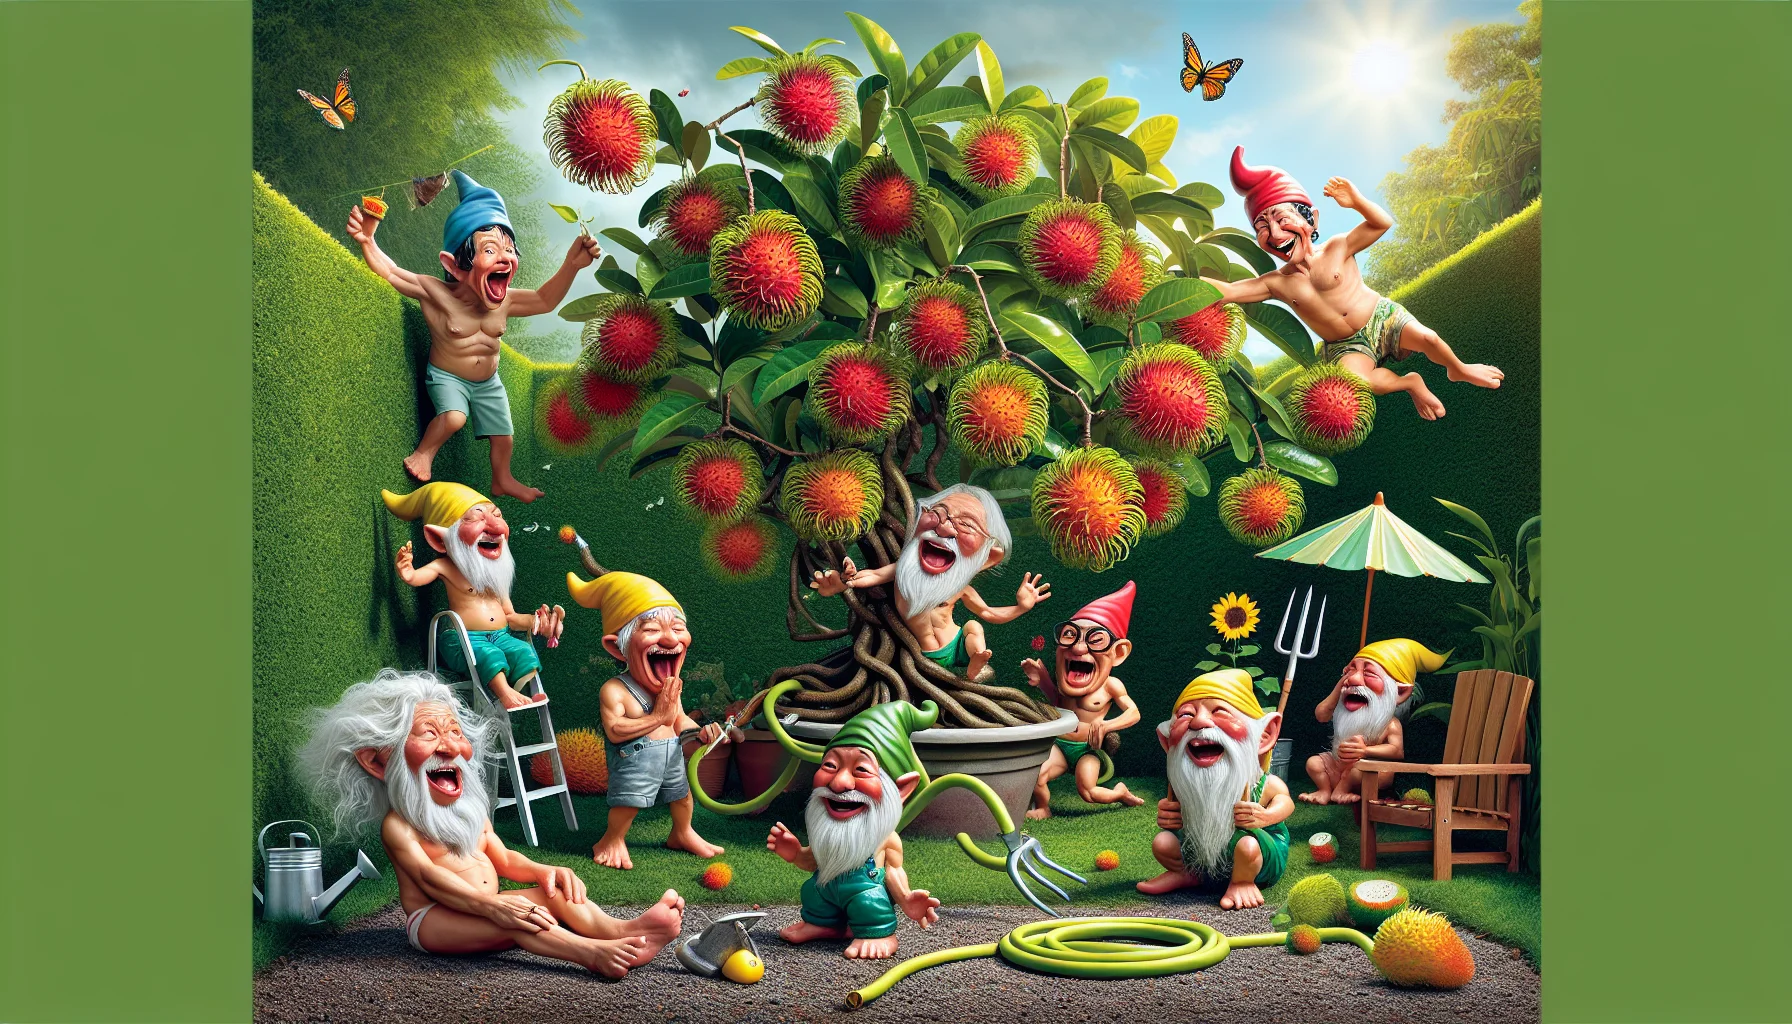 Visualize a humorous and lively scene capturing the joy of gardening. It features a lively rambutan tree in a sunny backyard. Quirky garden gnomes with various descents, including Caucasian, Asian, and Middle-Eastern, are arranged around the tree in playful poses, seemingly tending to the tree. Each gnome displays exaggerated expressions of surprise, awe, and delight upon discovering the exotic rambutan fruits. Subtle details such as a garden hose coiling like a snake, a sunflower acting as a parasol for a gnome, and a fluttering butterfly add to the amusing ambiance. This image encapsulates the essence of gardening - fun, relaxation, and a touch of the unexpected.